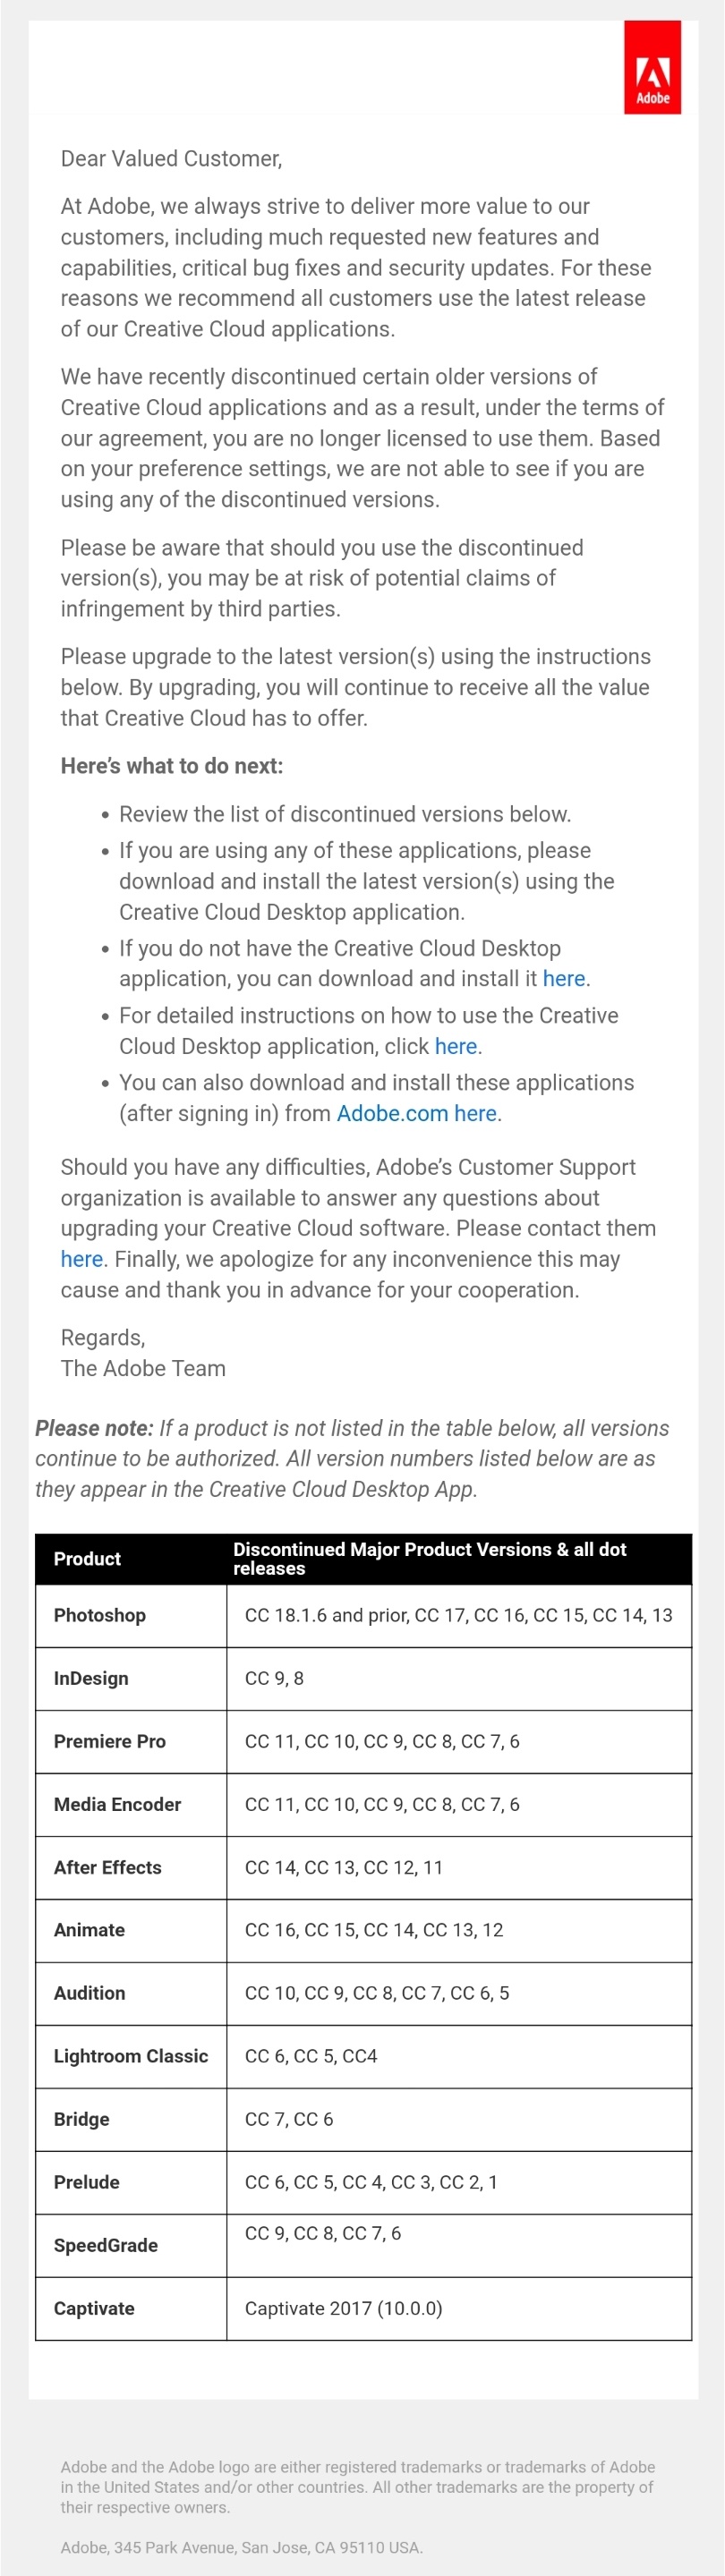 Adobe Creative Cloud discontinued apps: Adobe clarifies its letter and list 7